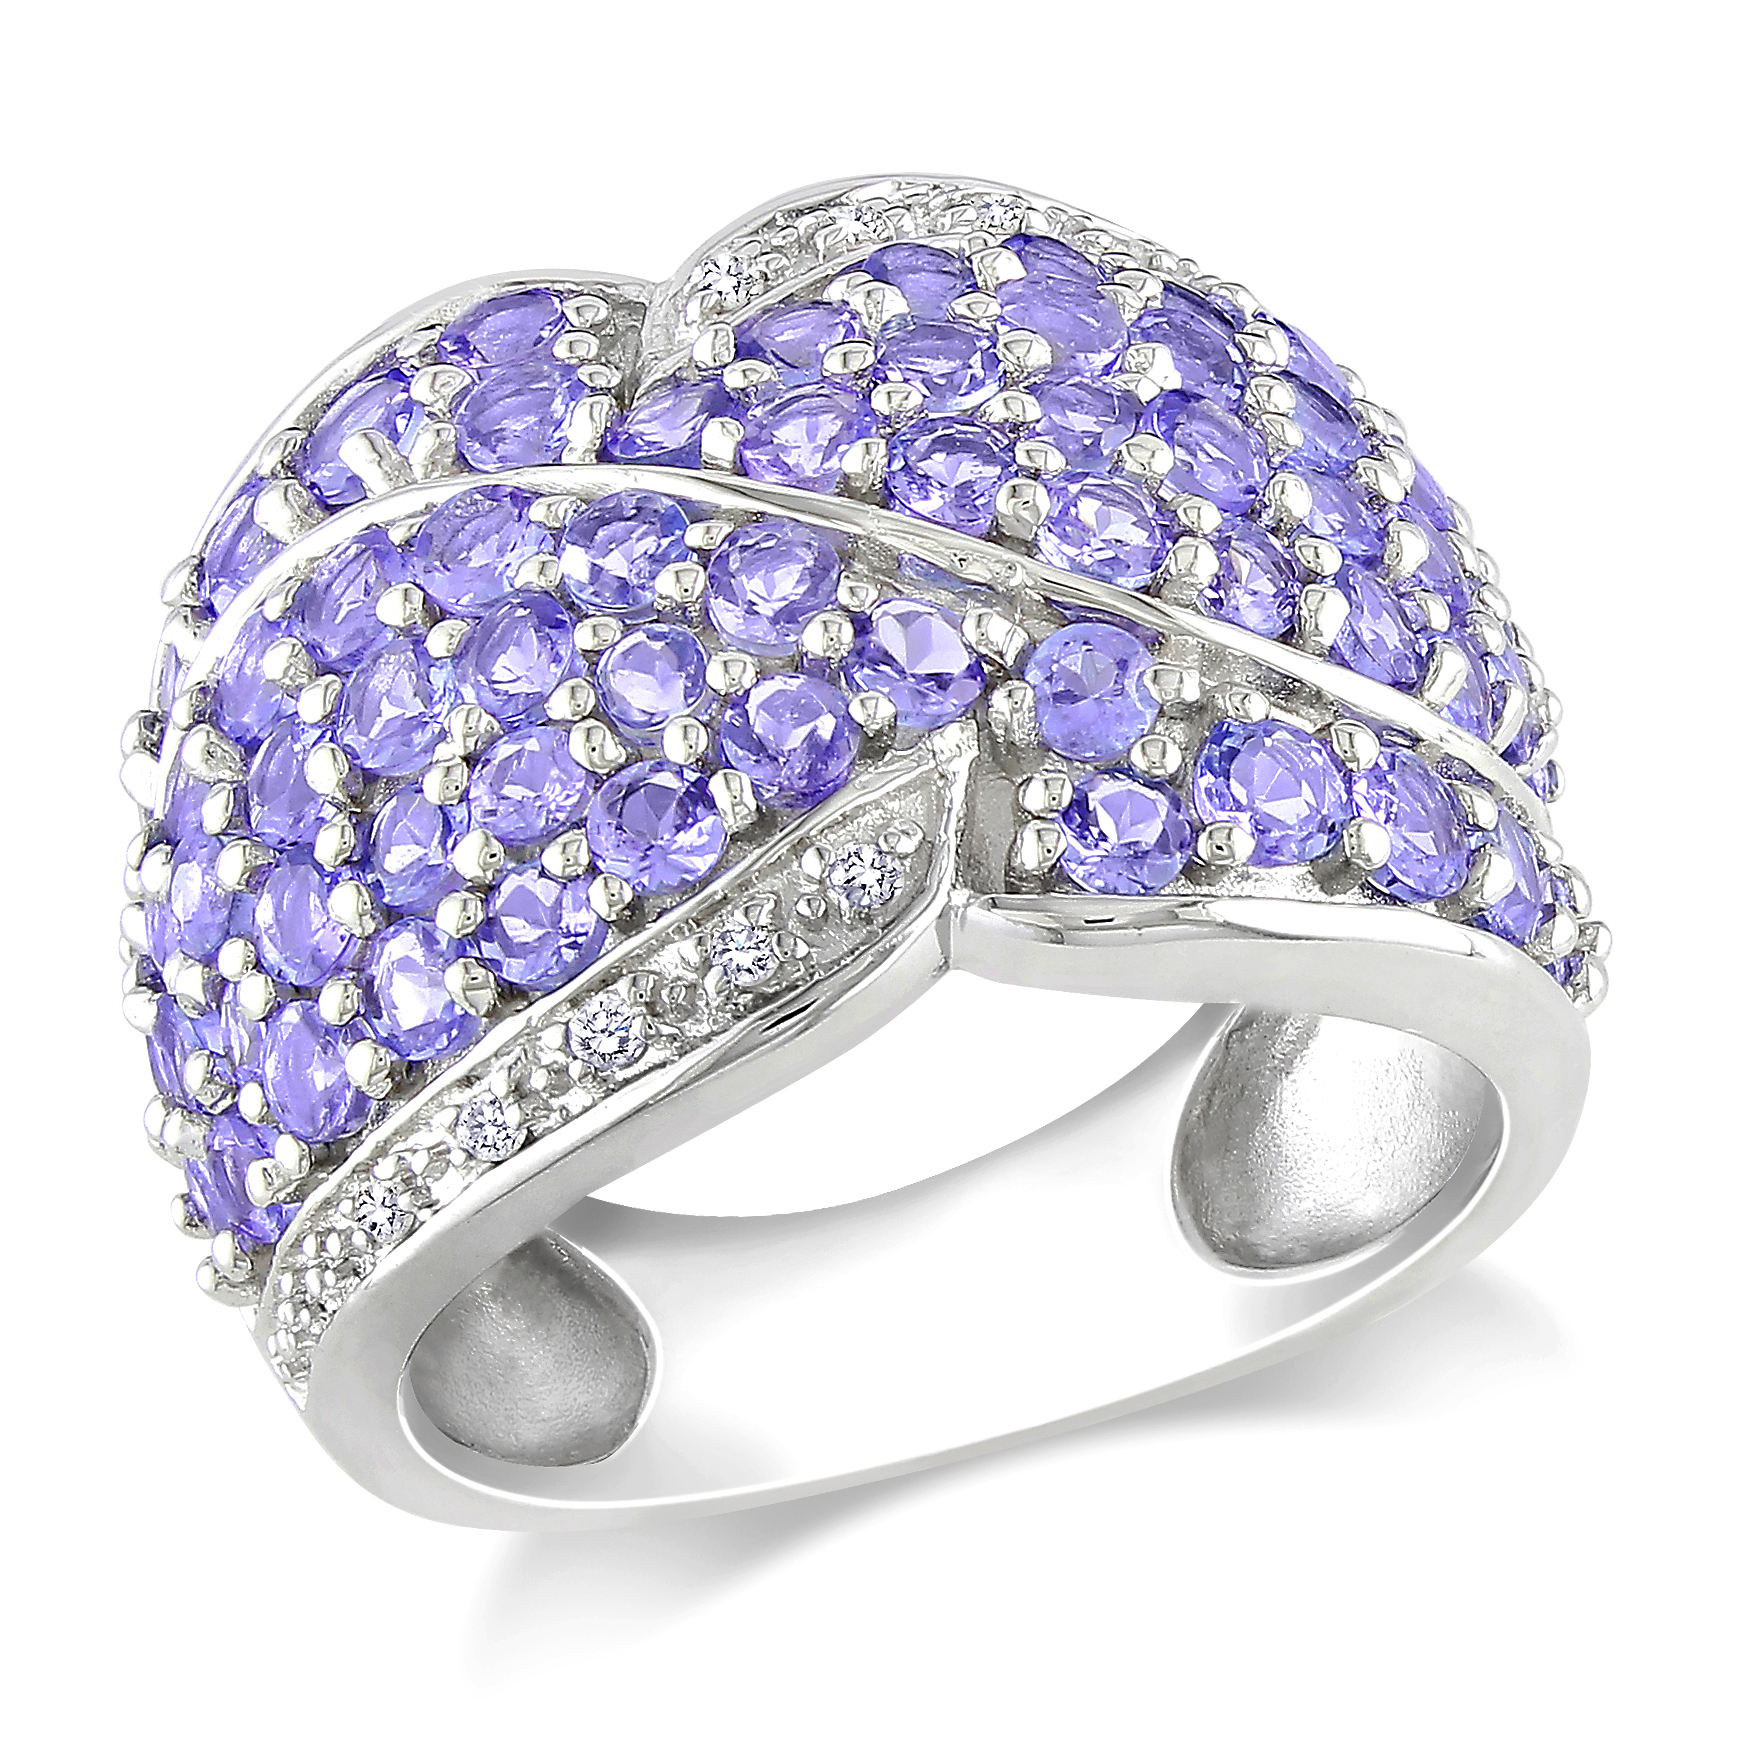 0.06 Carat T.W. Diamond and 2 2/5 Carat T.G.W. Tanzanite Fashion Ring in Sterling Silver GH I3